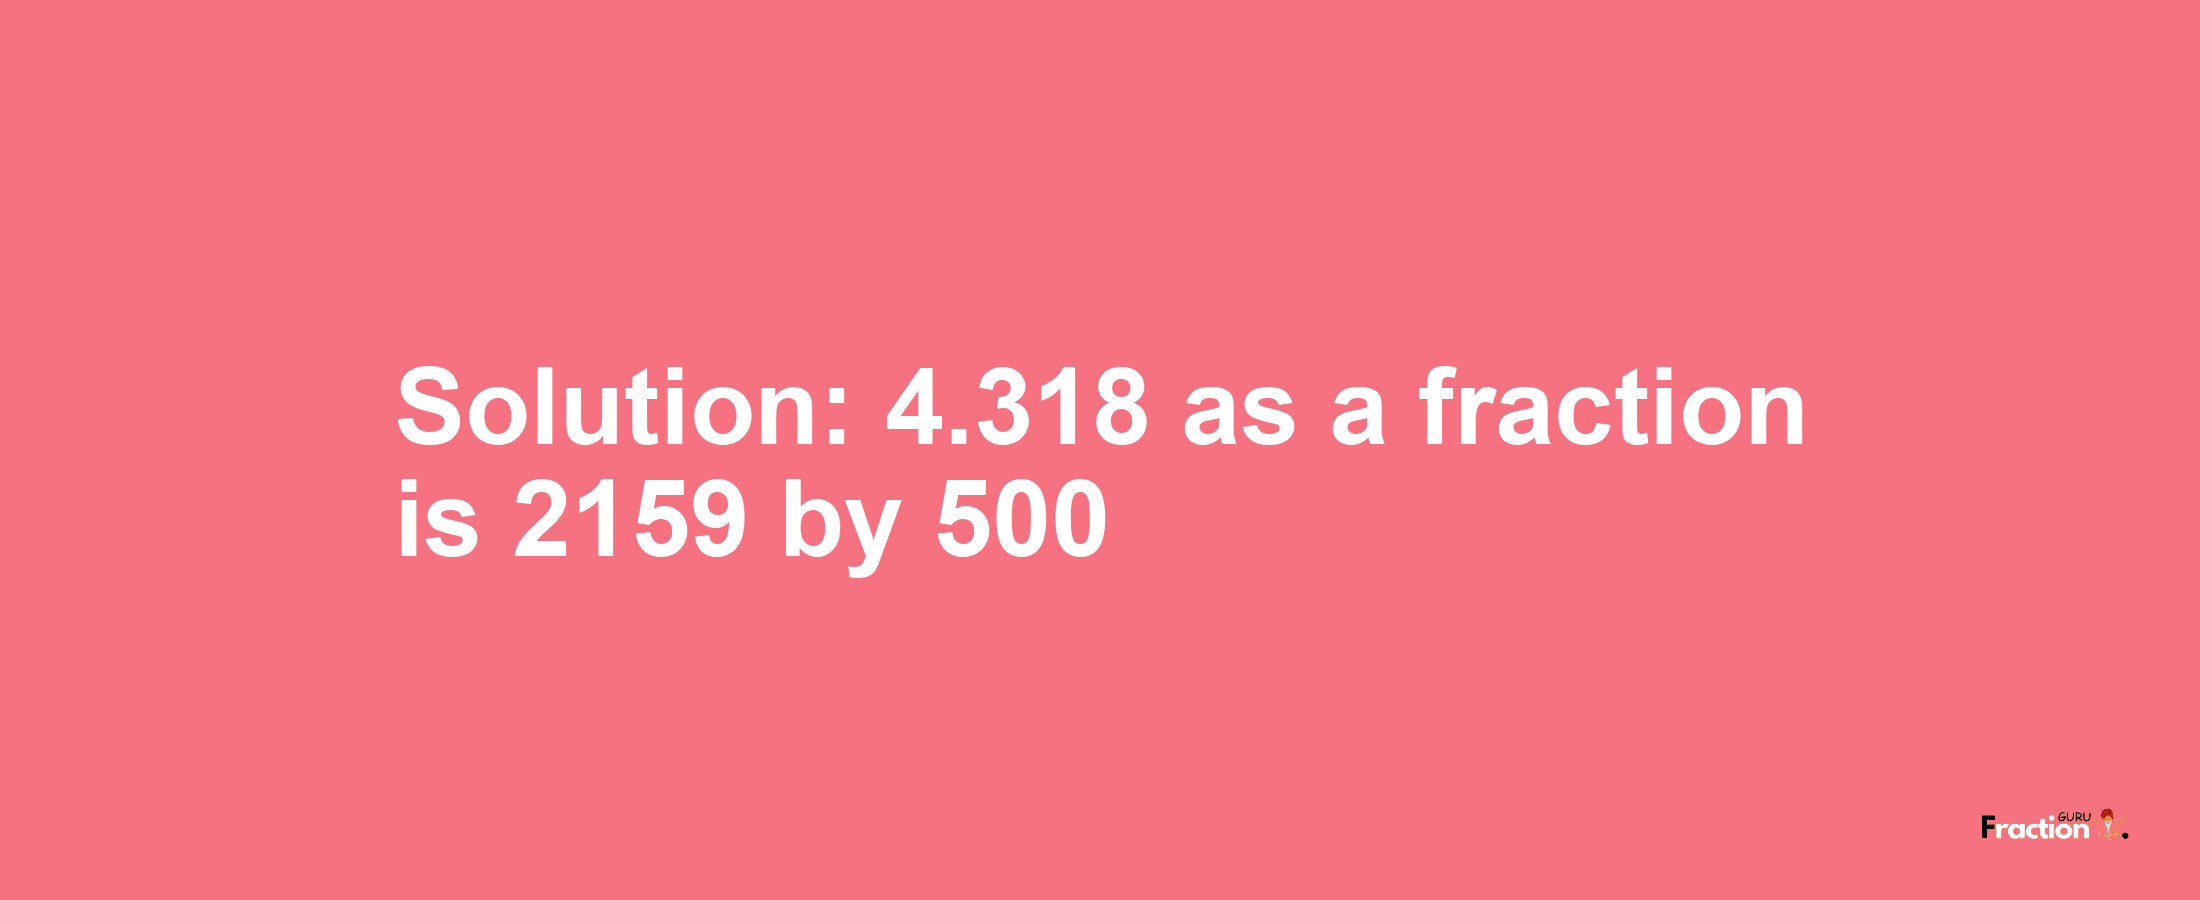 Solution:4.318 as a fraction is 2159/500